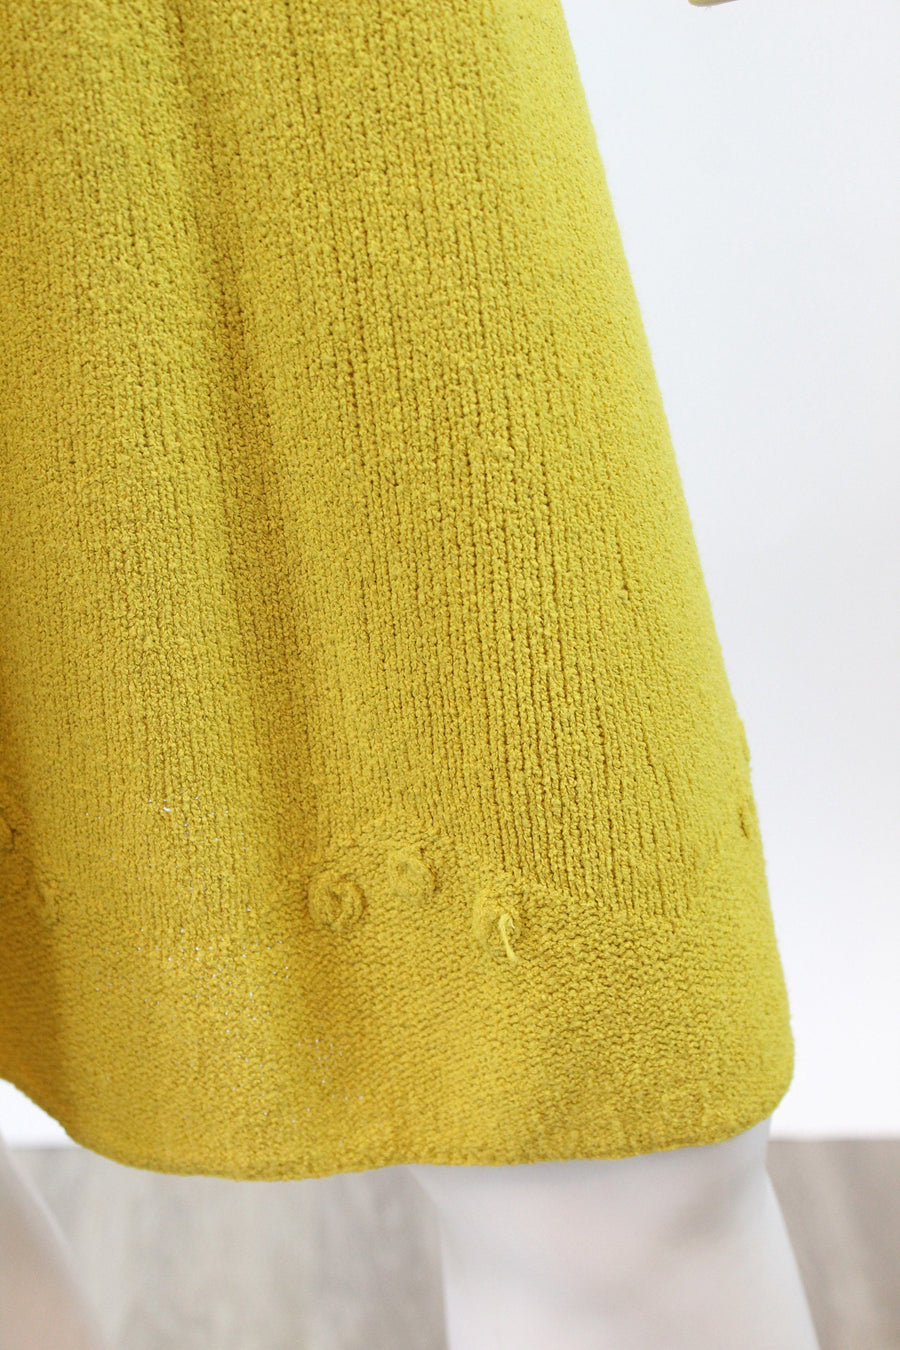 1940s CHARTREUSE knit dress xs small | new spring